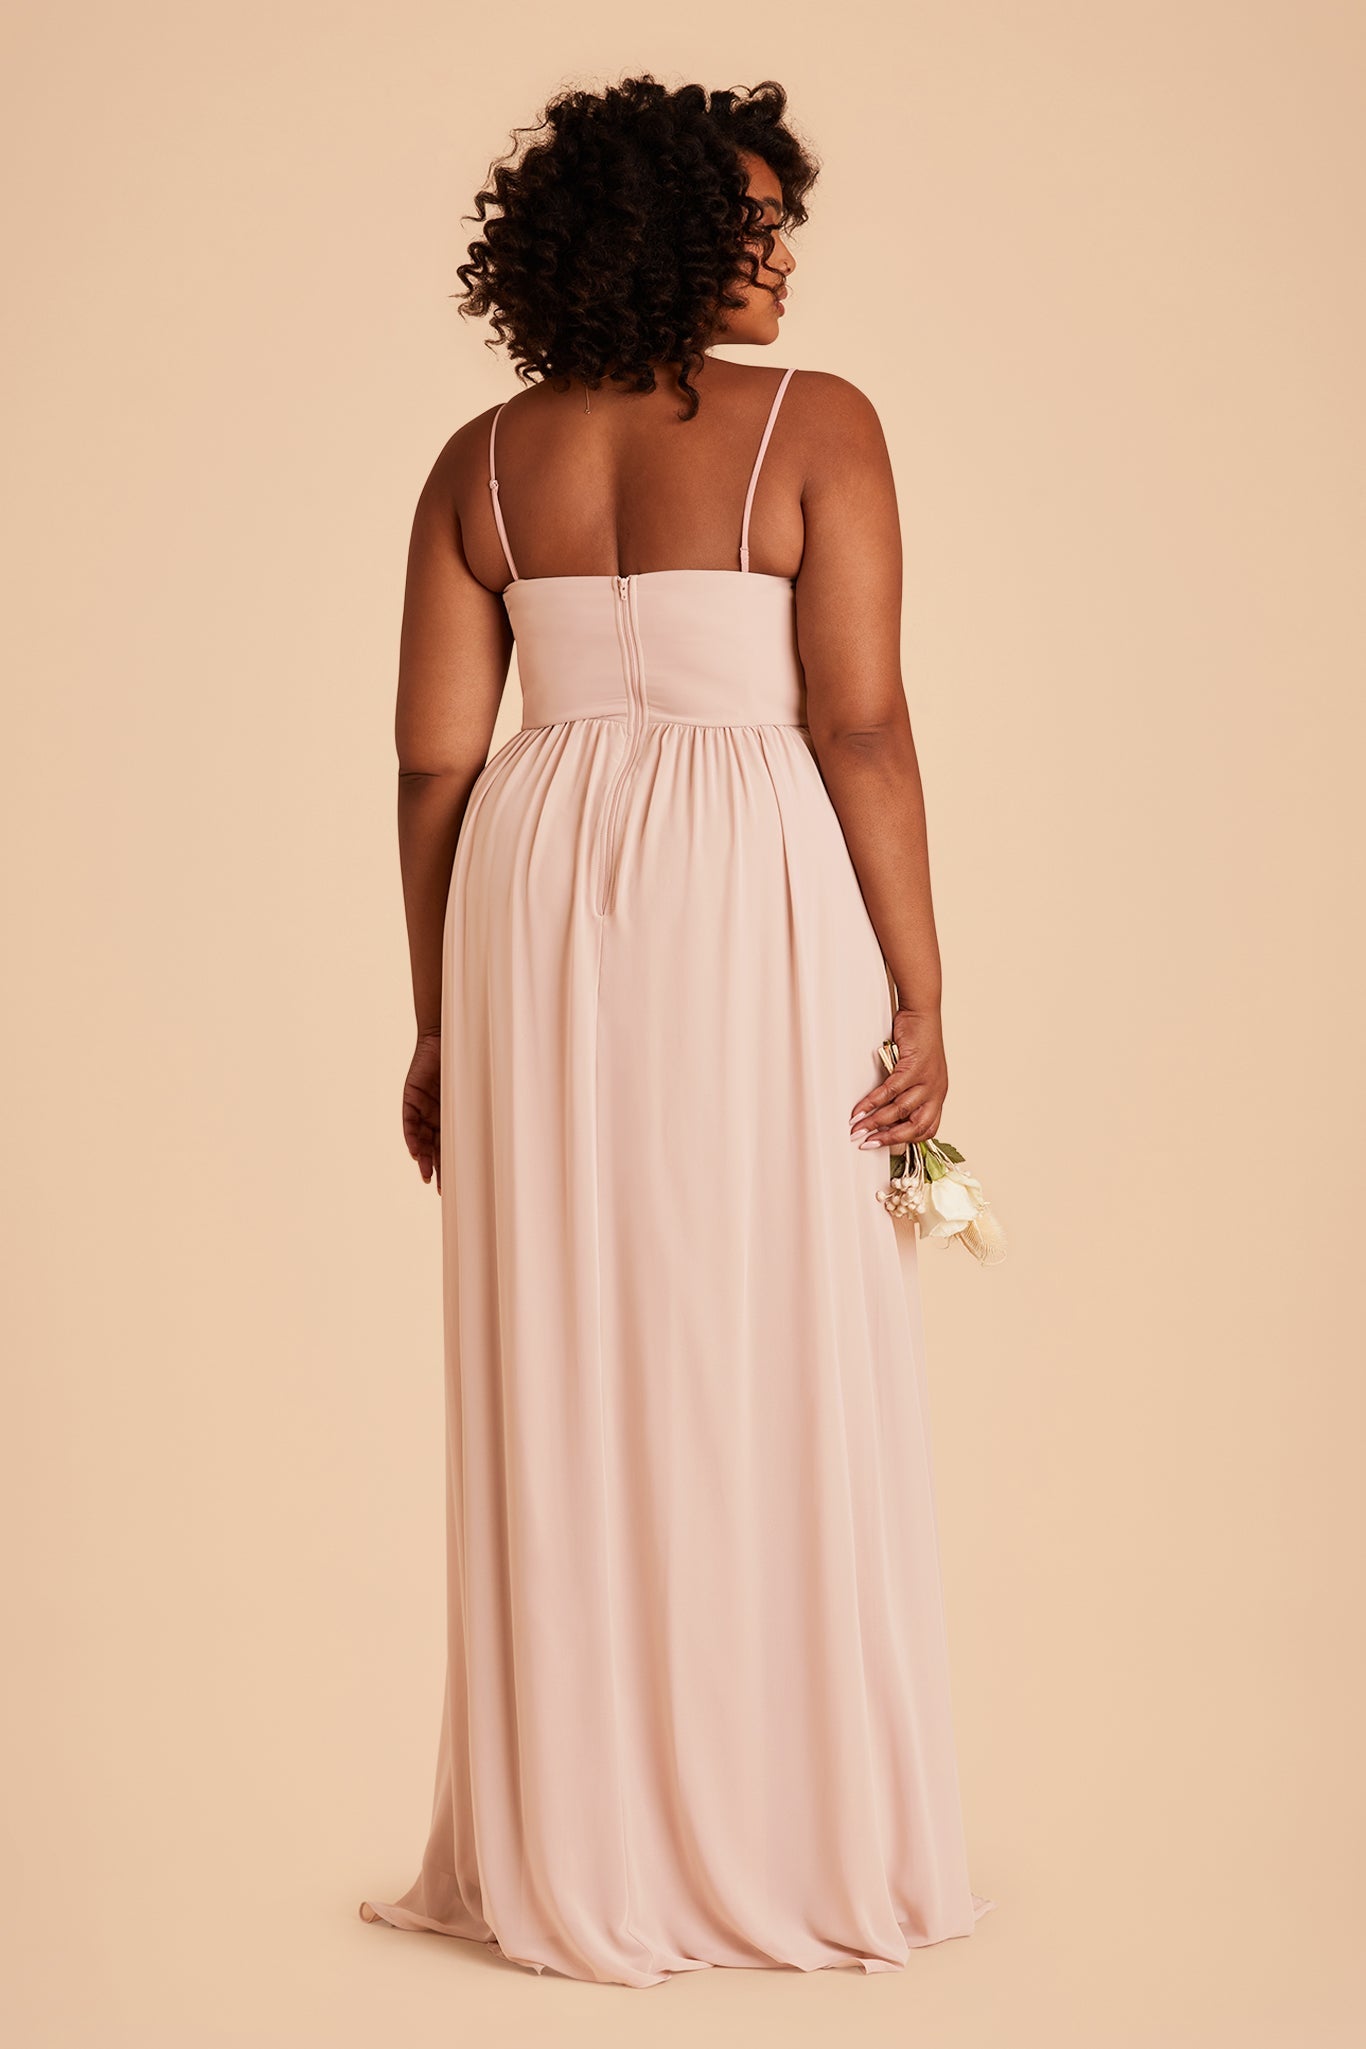 August plus size bridesmaid dress with slit in pale blush chiffon by Birdy Grey, back view